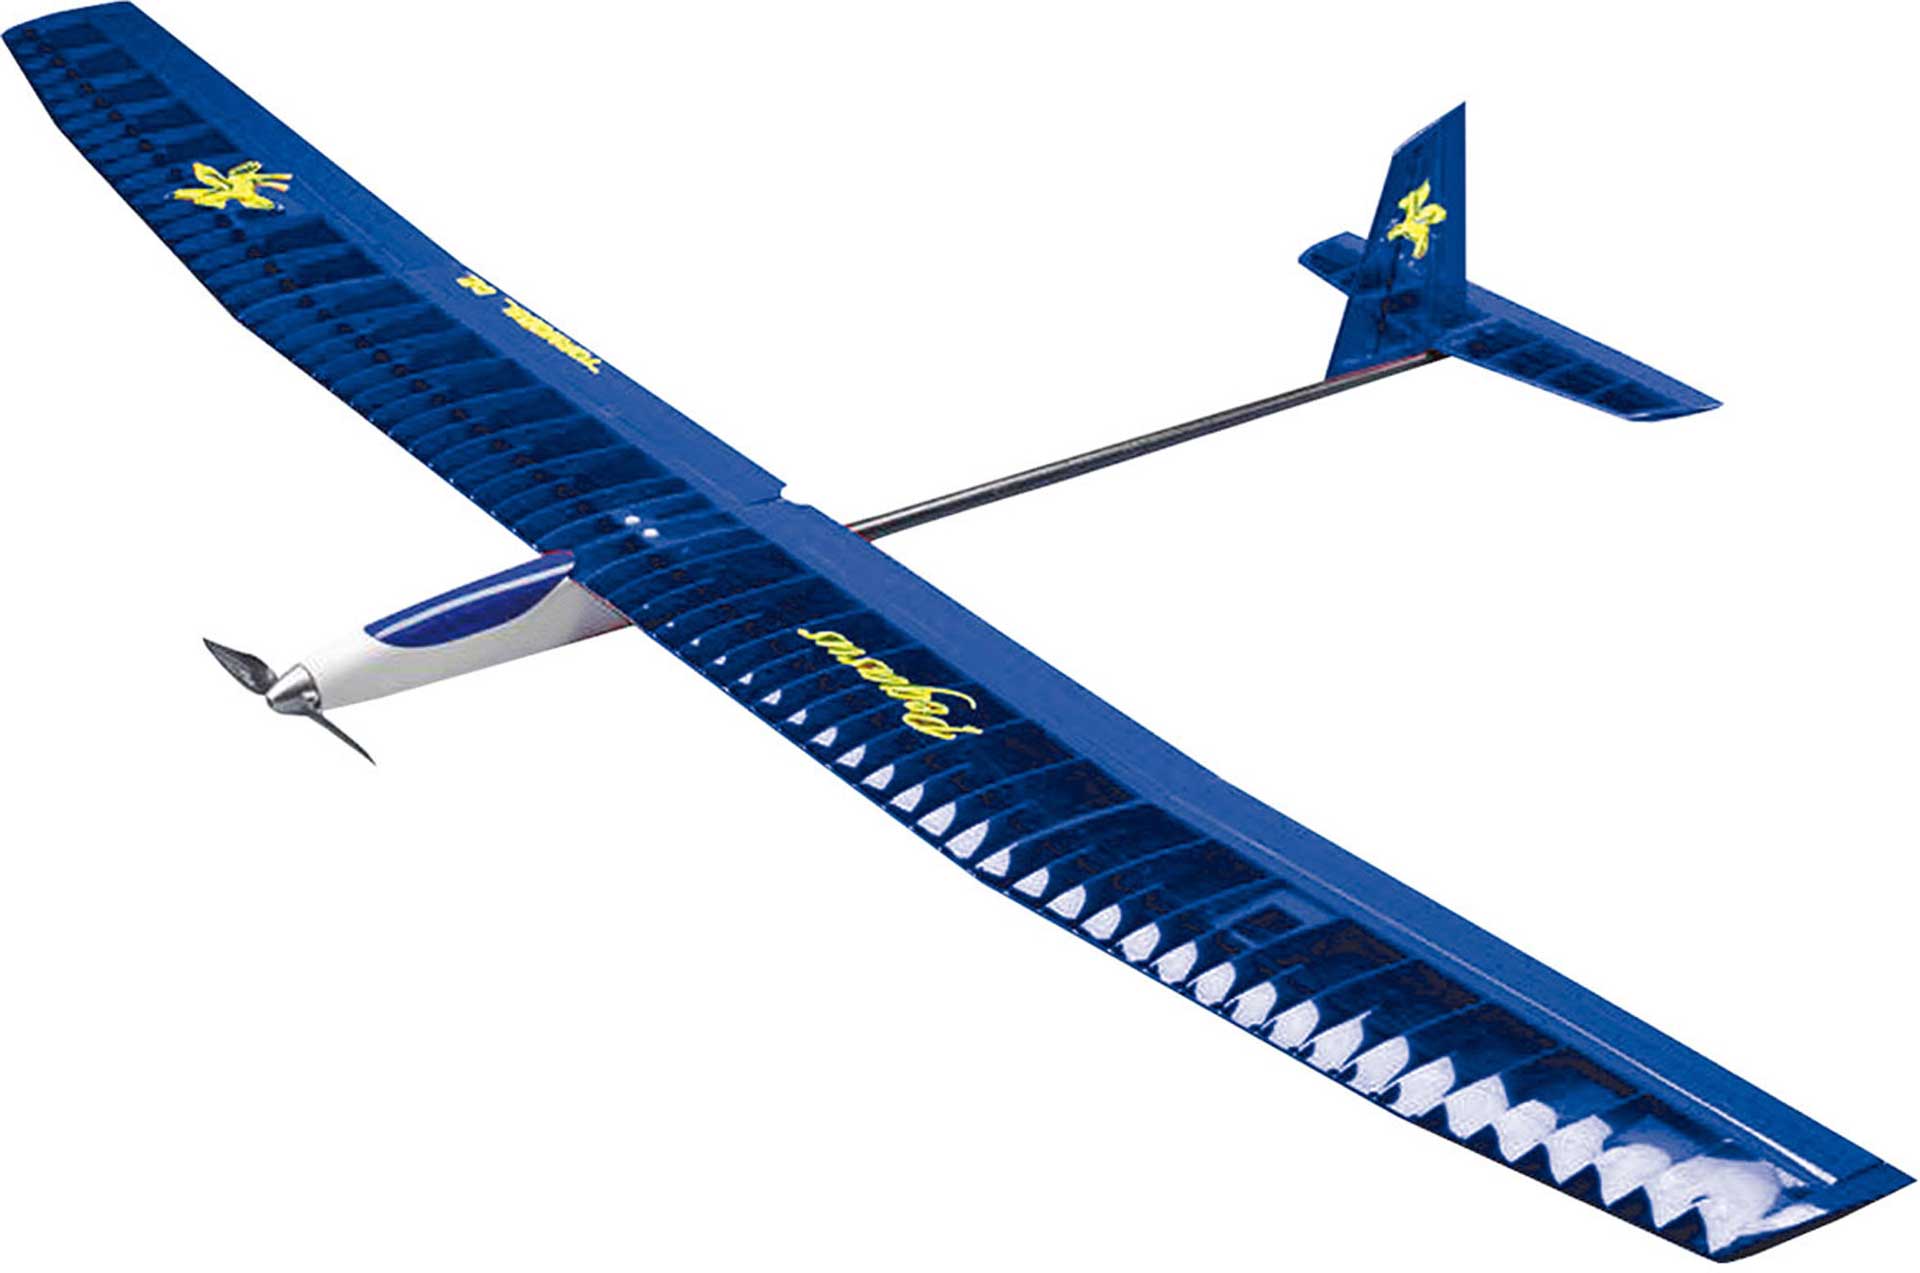 TOPMODEL PEGASUS K 2M ARF W. K-TAIL AND GRP FUSELAGE AND RIBBED WINGS WITH FULL COMPOSITE FUSELAGE AND FINWINGS